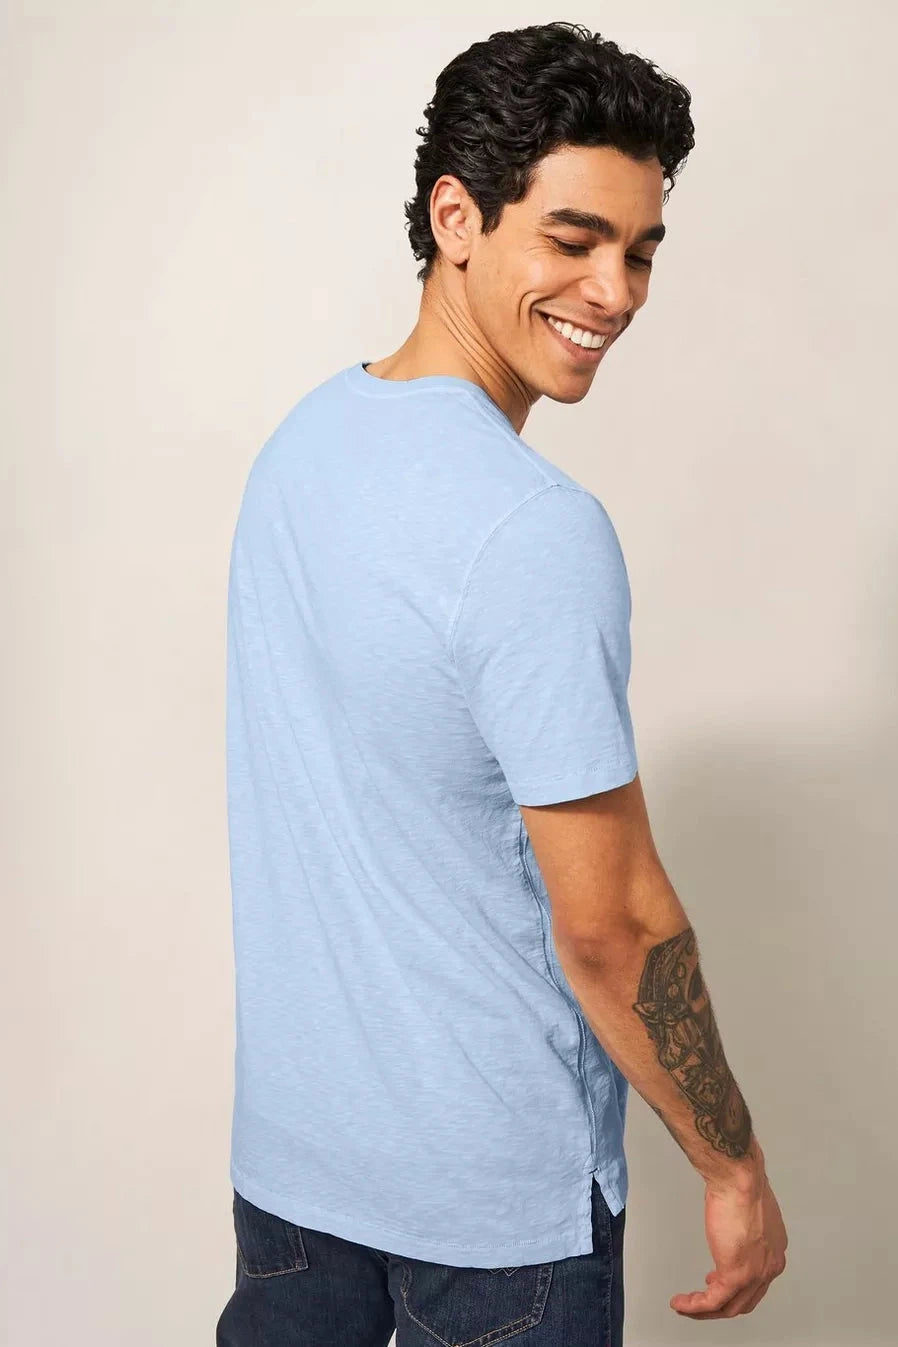 White Stuff Abersoch Short Sleeve Tee in Light Blue-Mens-Ohh! By Gum - Shop Sustainable